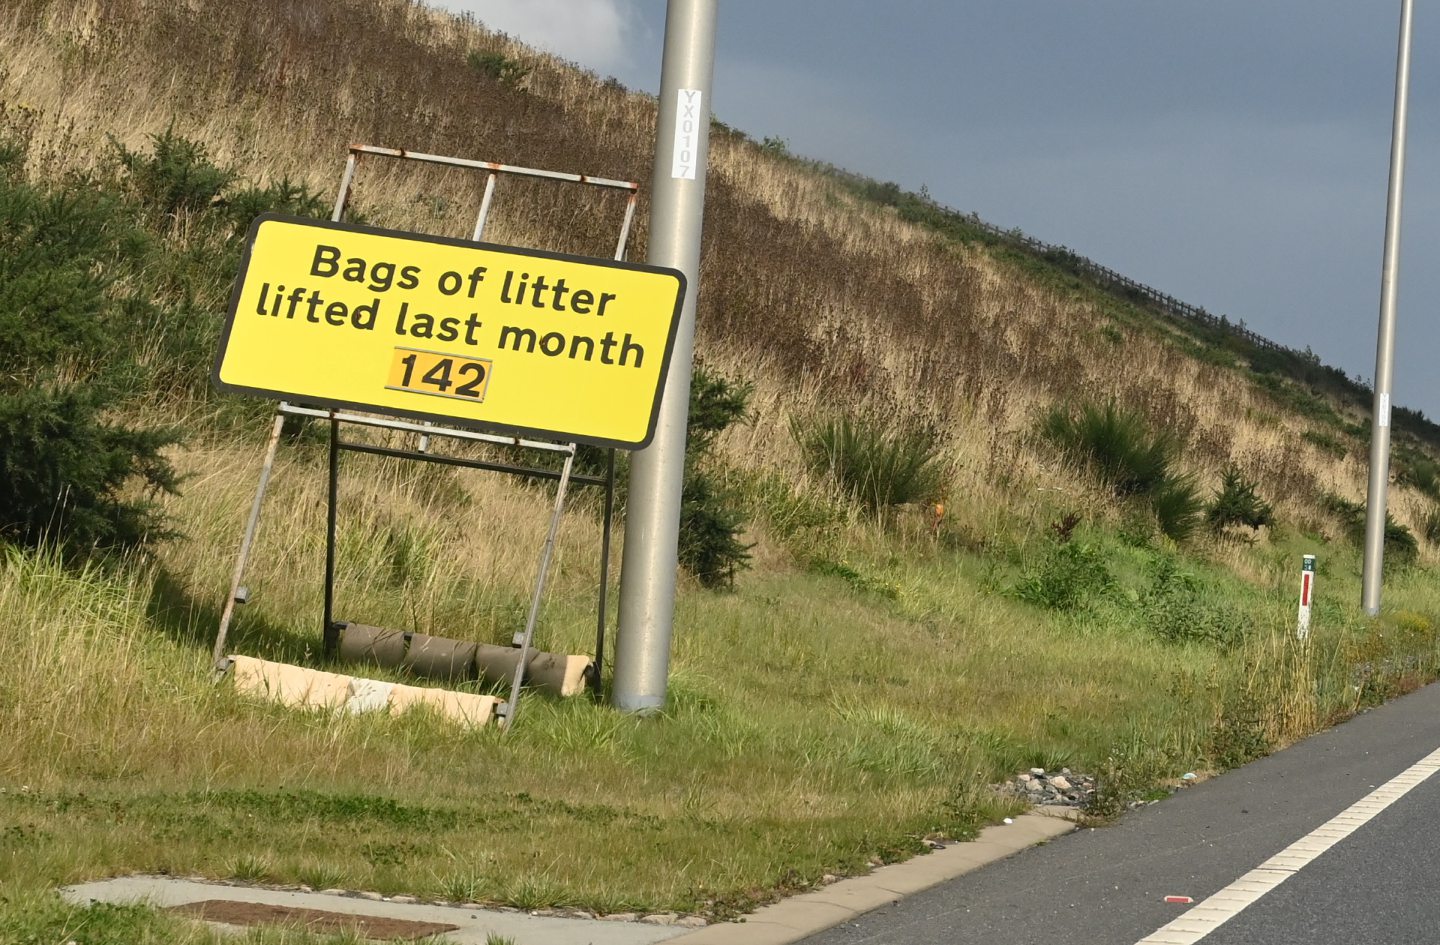 A sign on the AWPR showing 142 bags of litter were collected in July 2022.